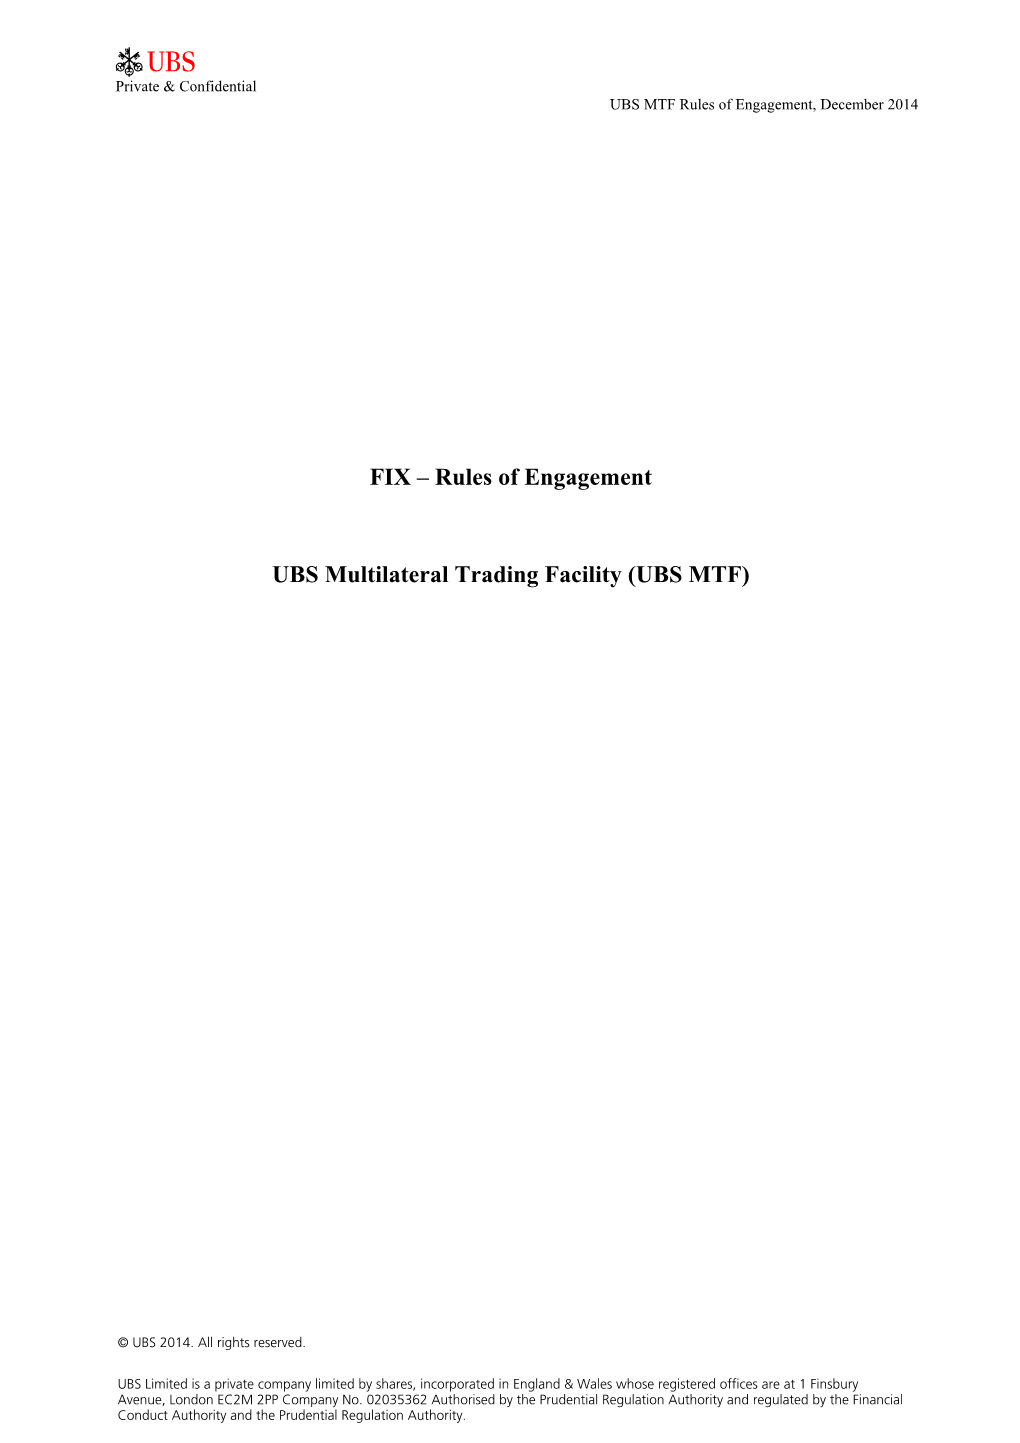 Rules of Engagement UBS Multilateral Trading Facility (UBS MTF)